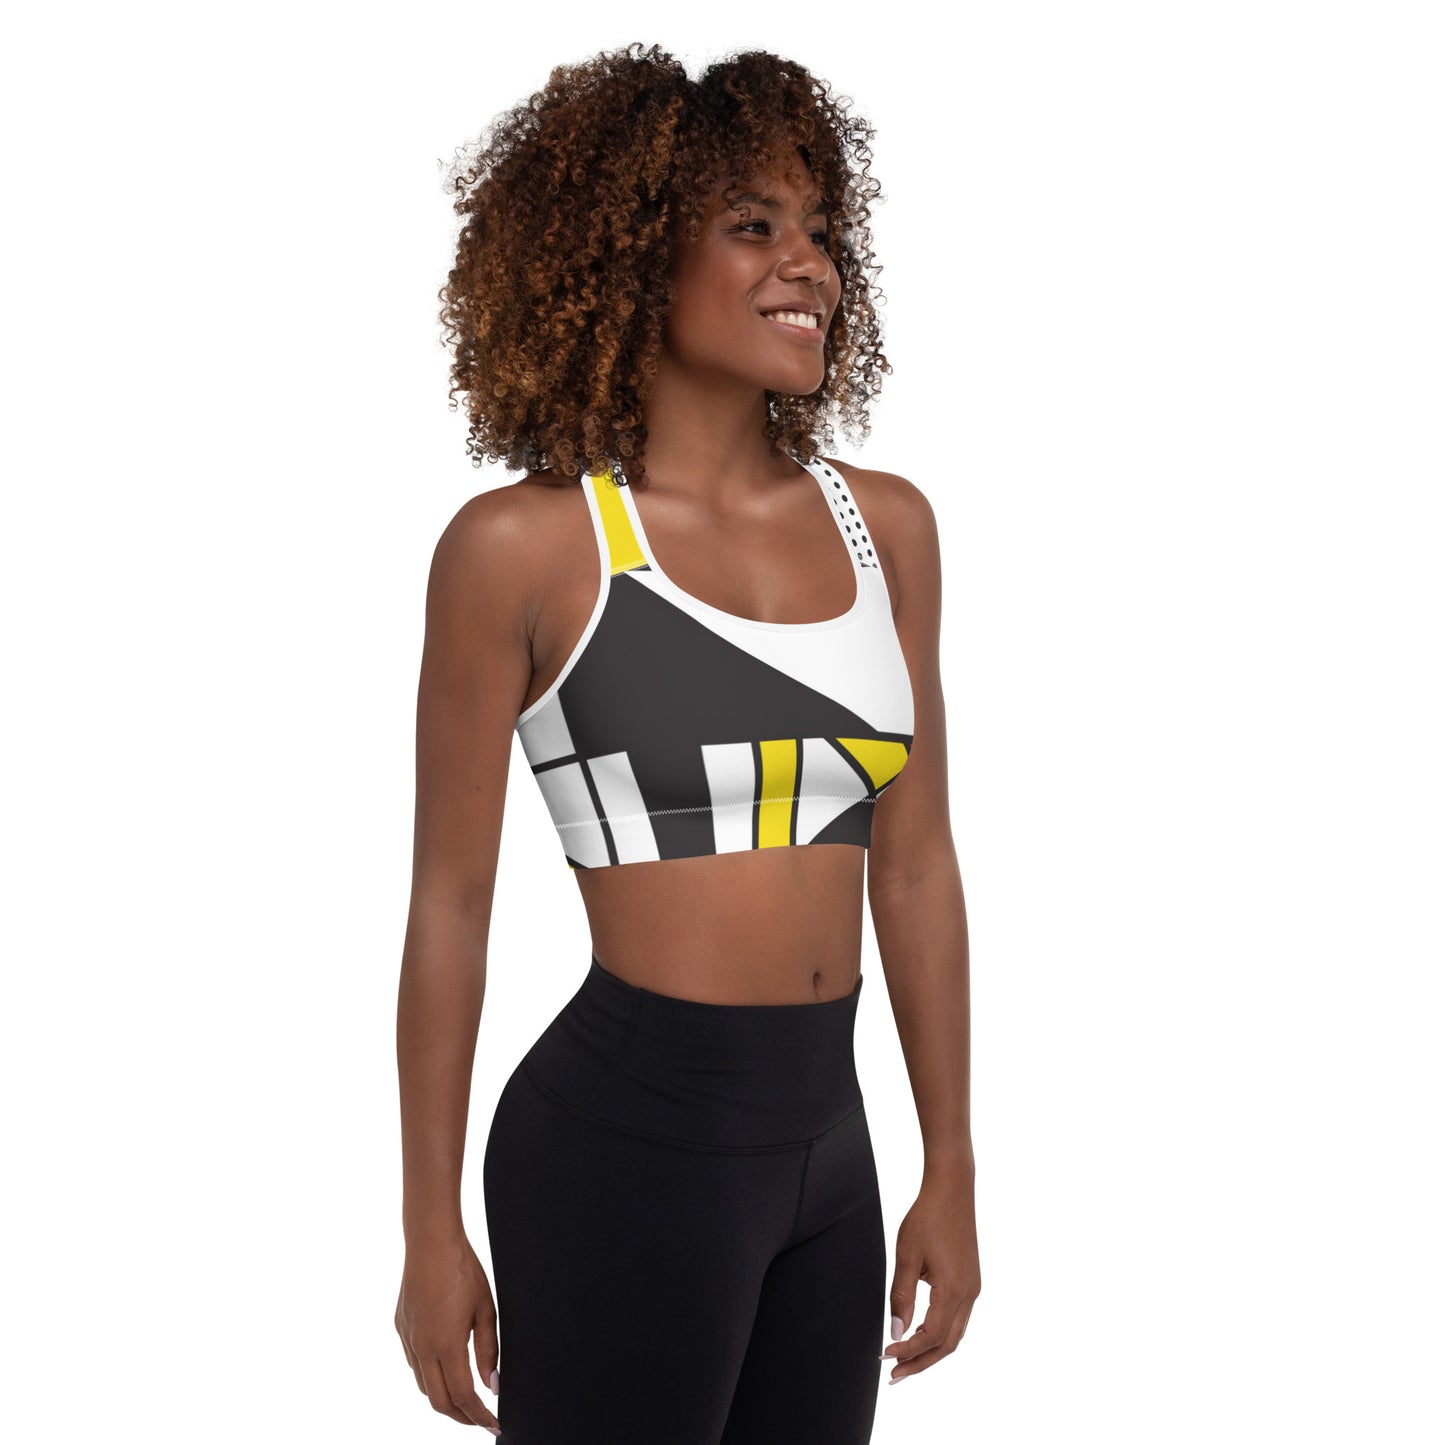 Padded Sports Bra with Mondrian design, sourced Vecteezy.com